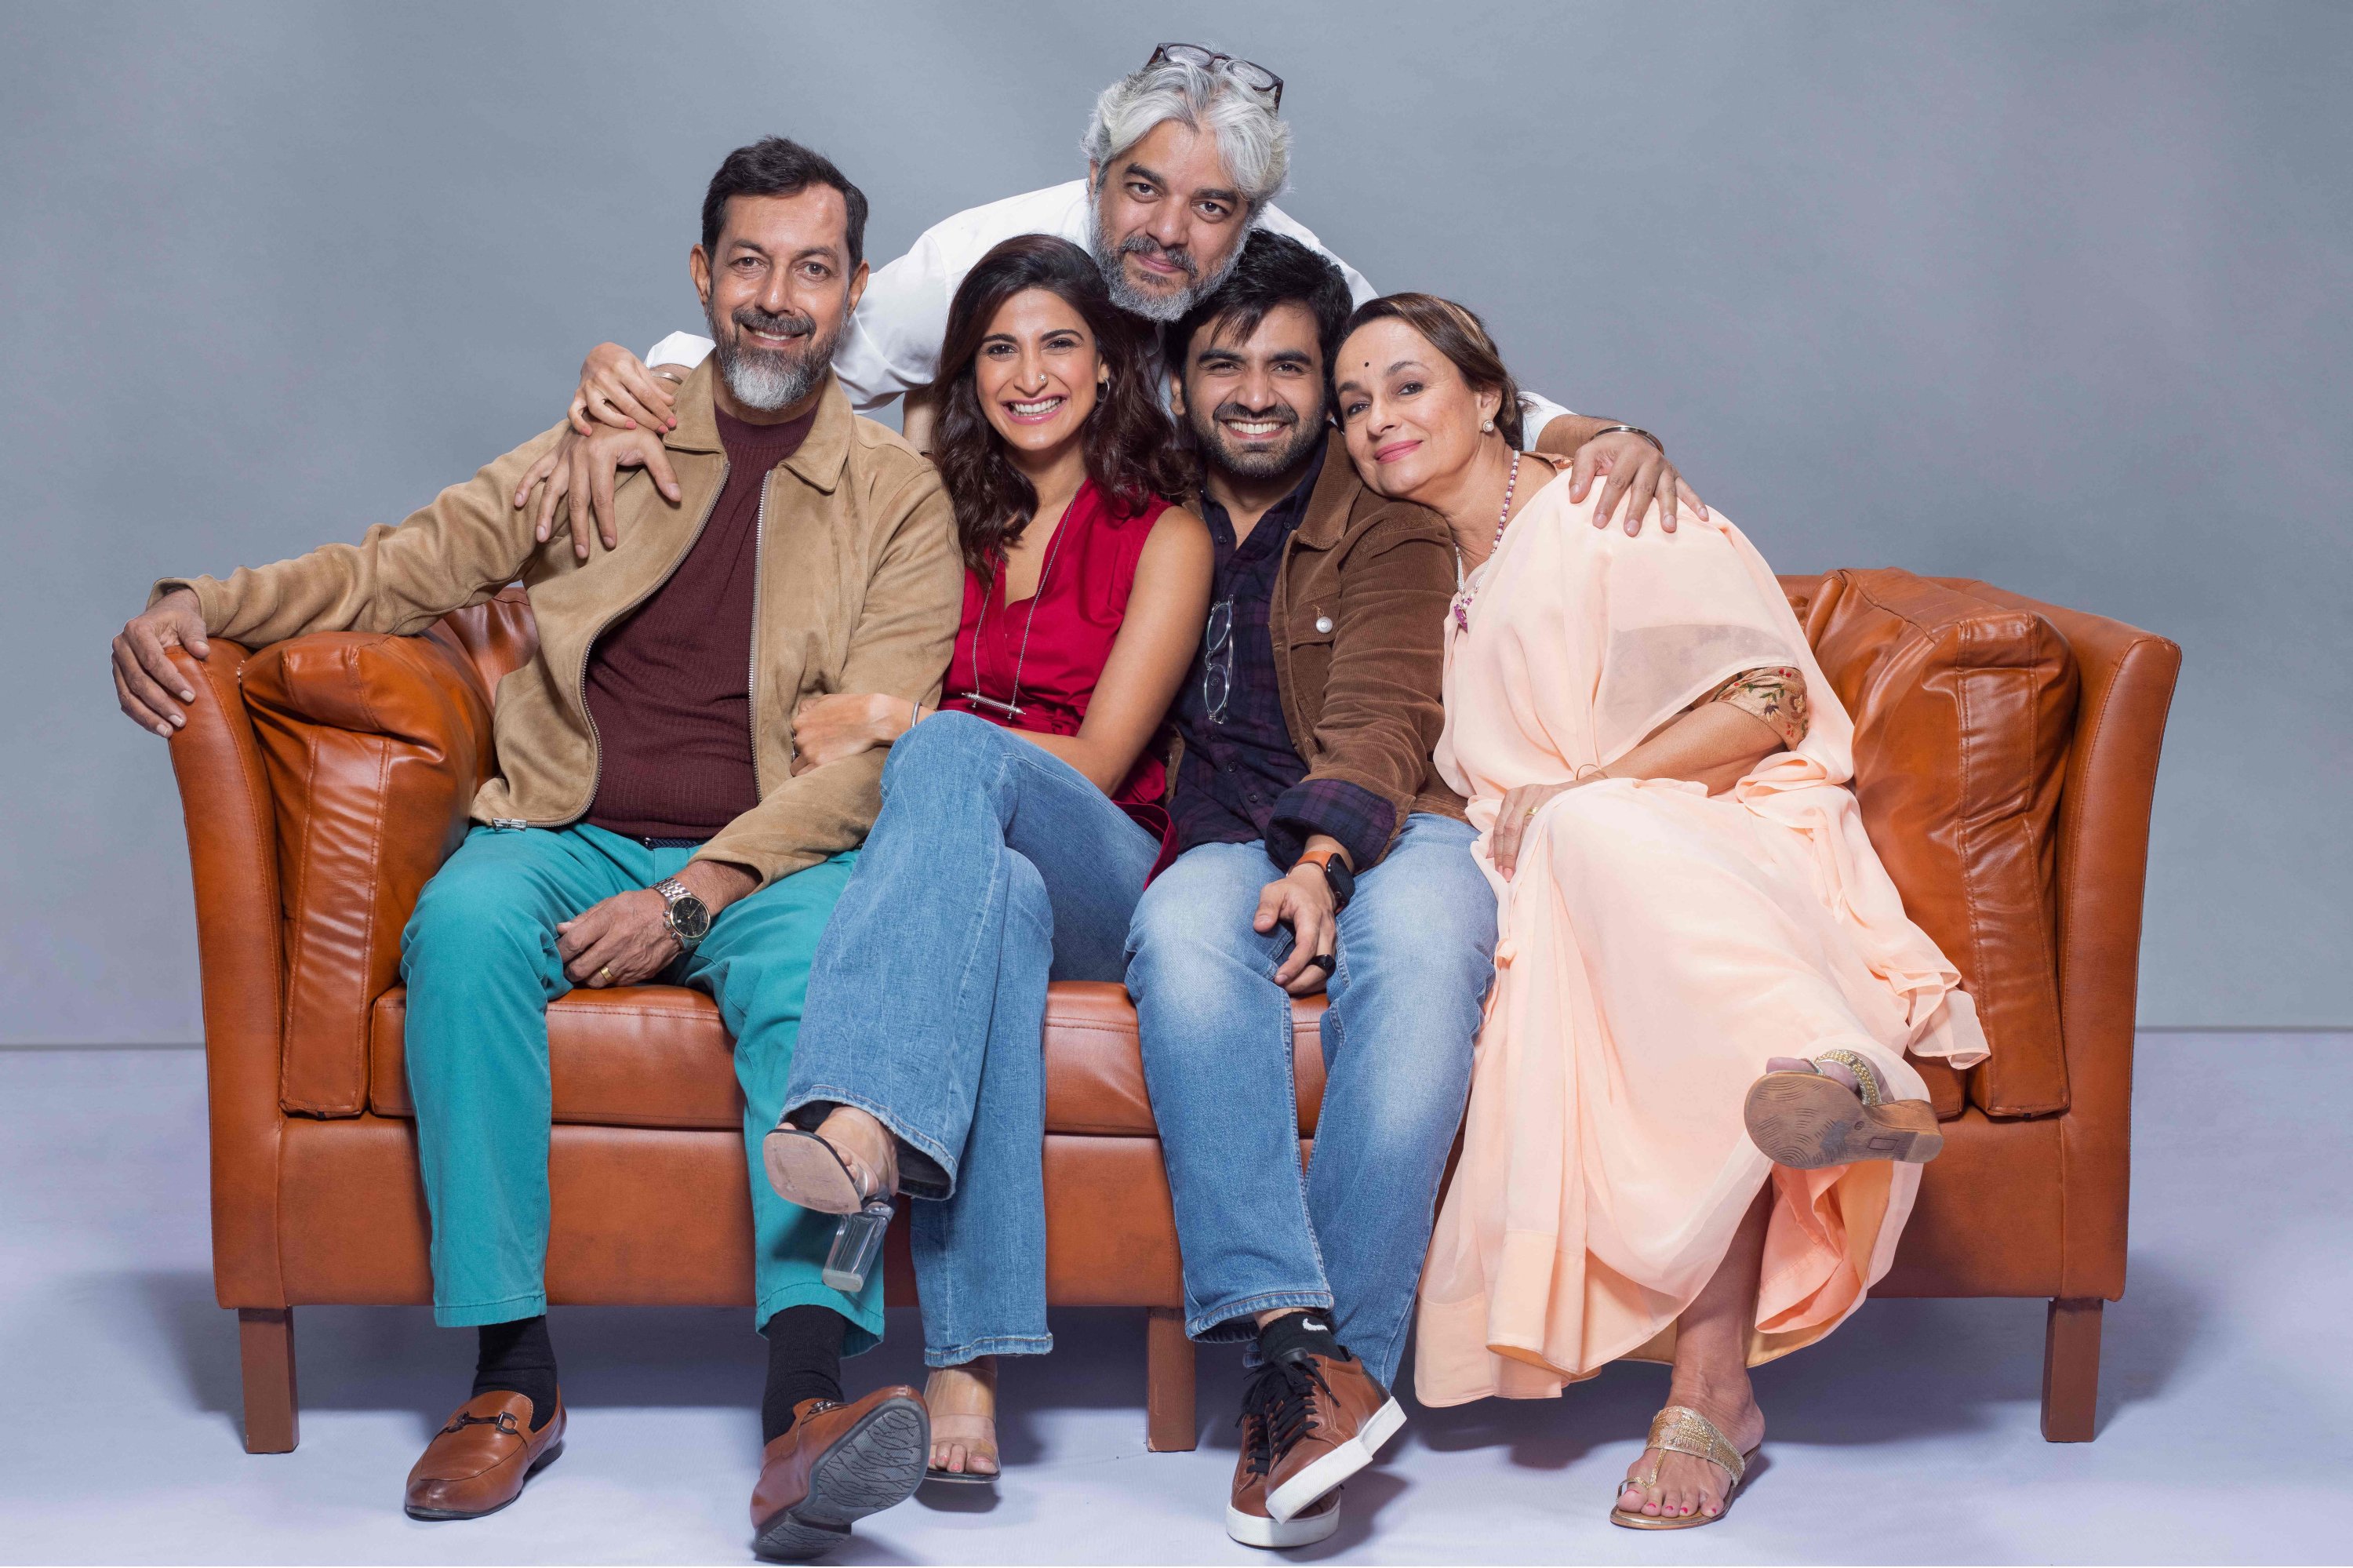 This handout photograph released by Netflix shows Bollywood actors and cast members (L-R) Rajat Kapoor, Aahana Kumra, Ayush Mehra, Soni Razdan posing for pictures with director Shaad Ali (top) during the promotion of the Indian drama web series 